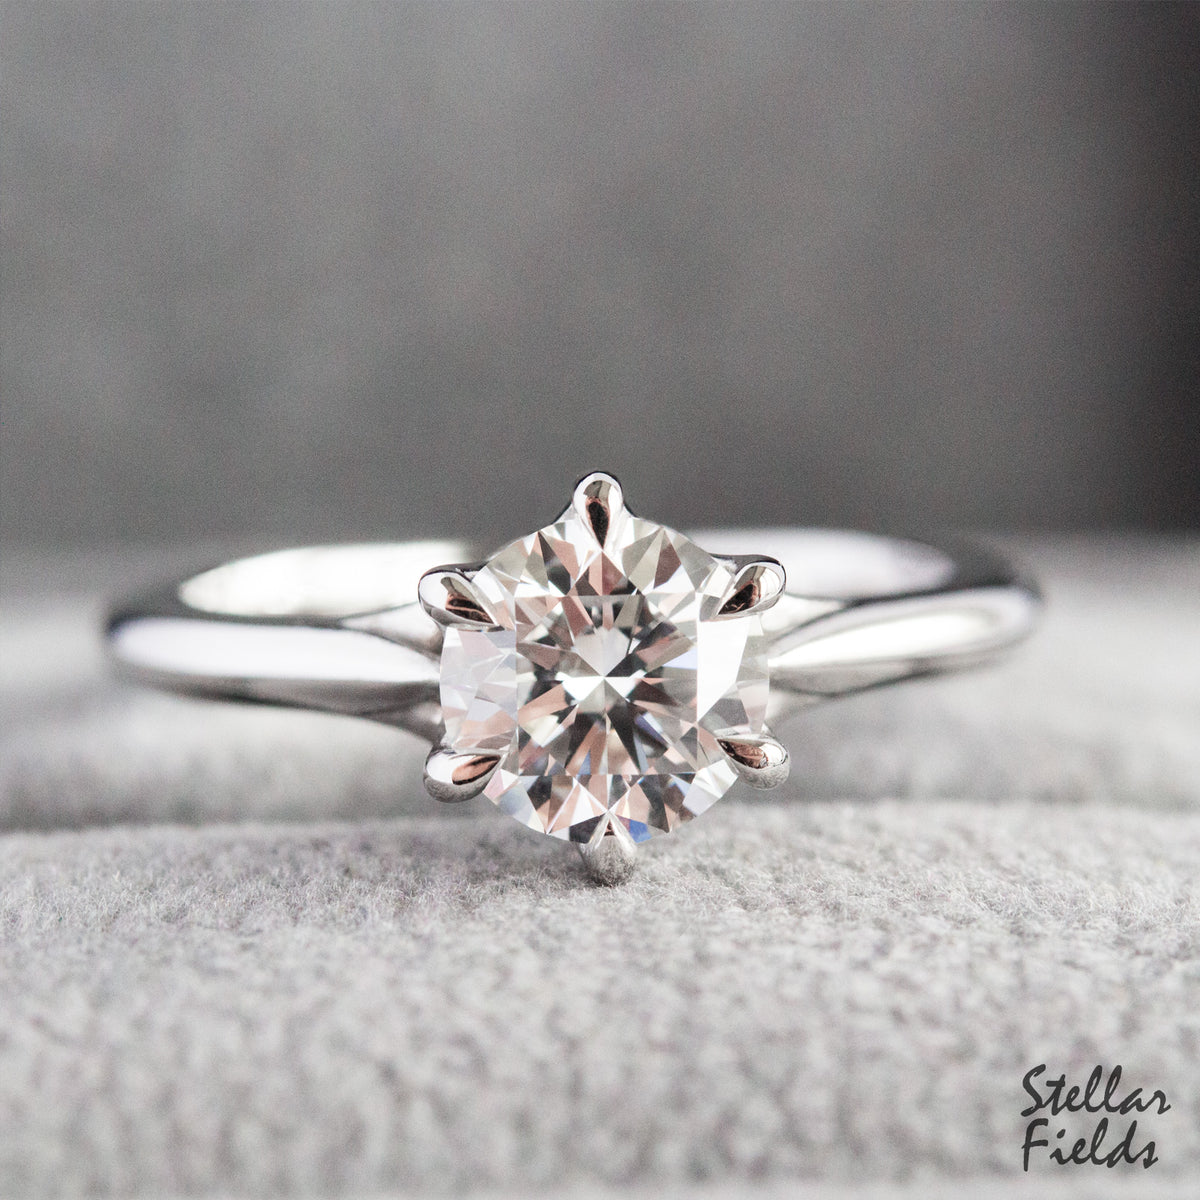 Diamond Solitaire Prong Engagement Ring 6 Prong Ring Modern Vintage Platinum Stellar Fields Jewelry